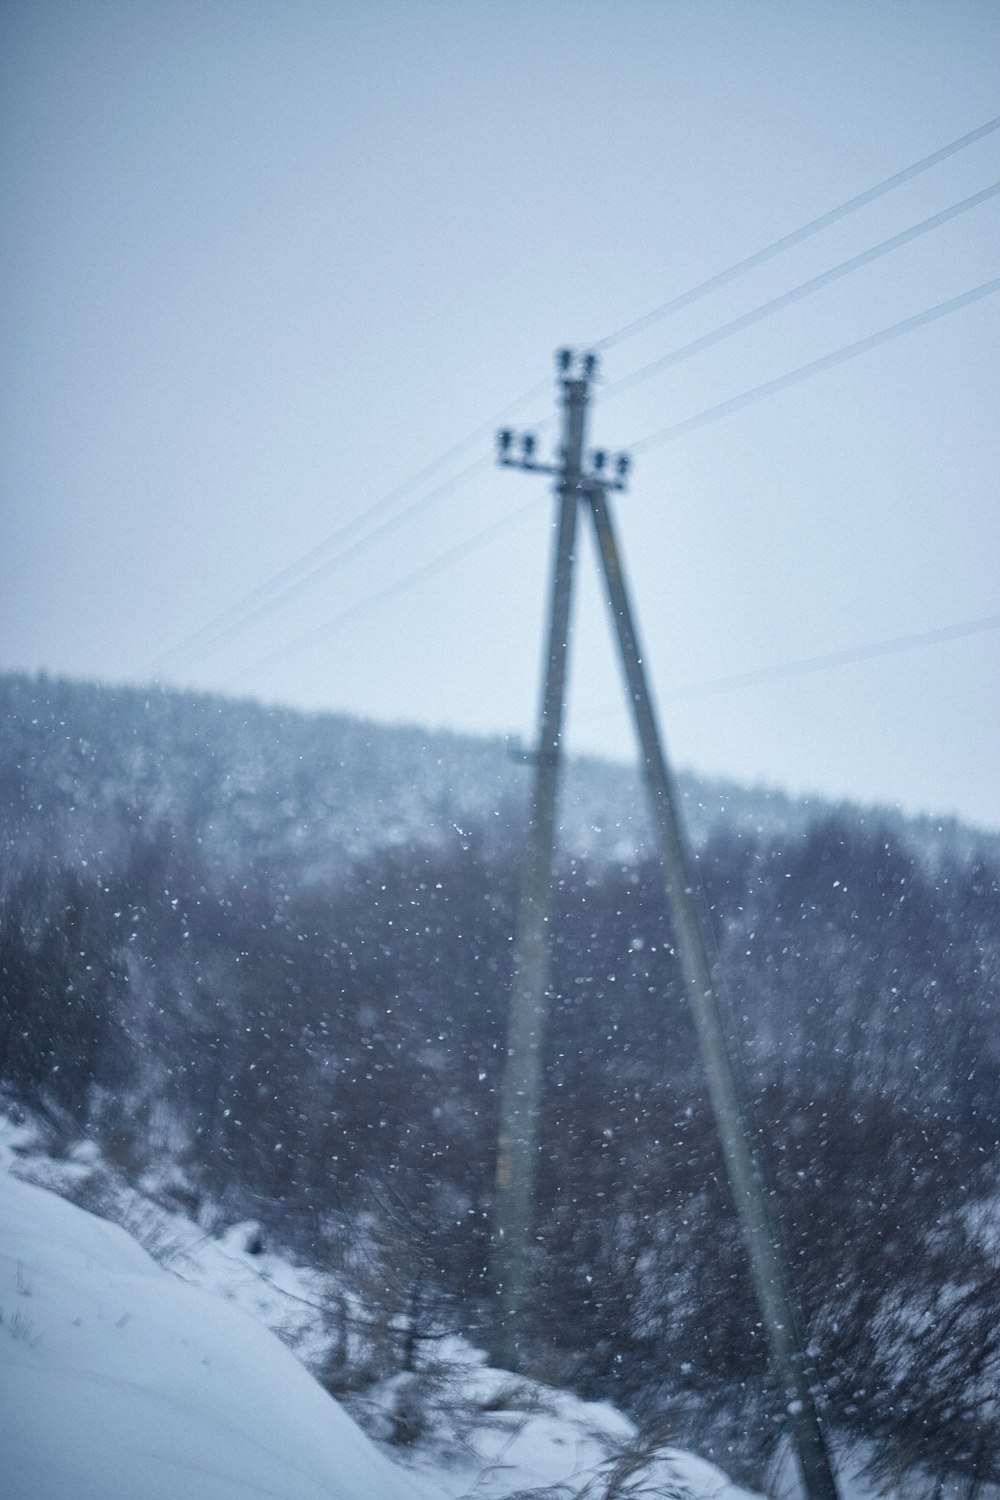 a snow covered hill with power lines in the background